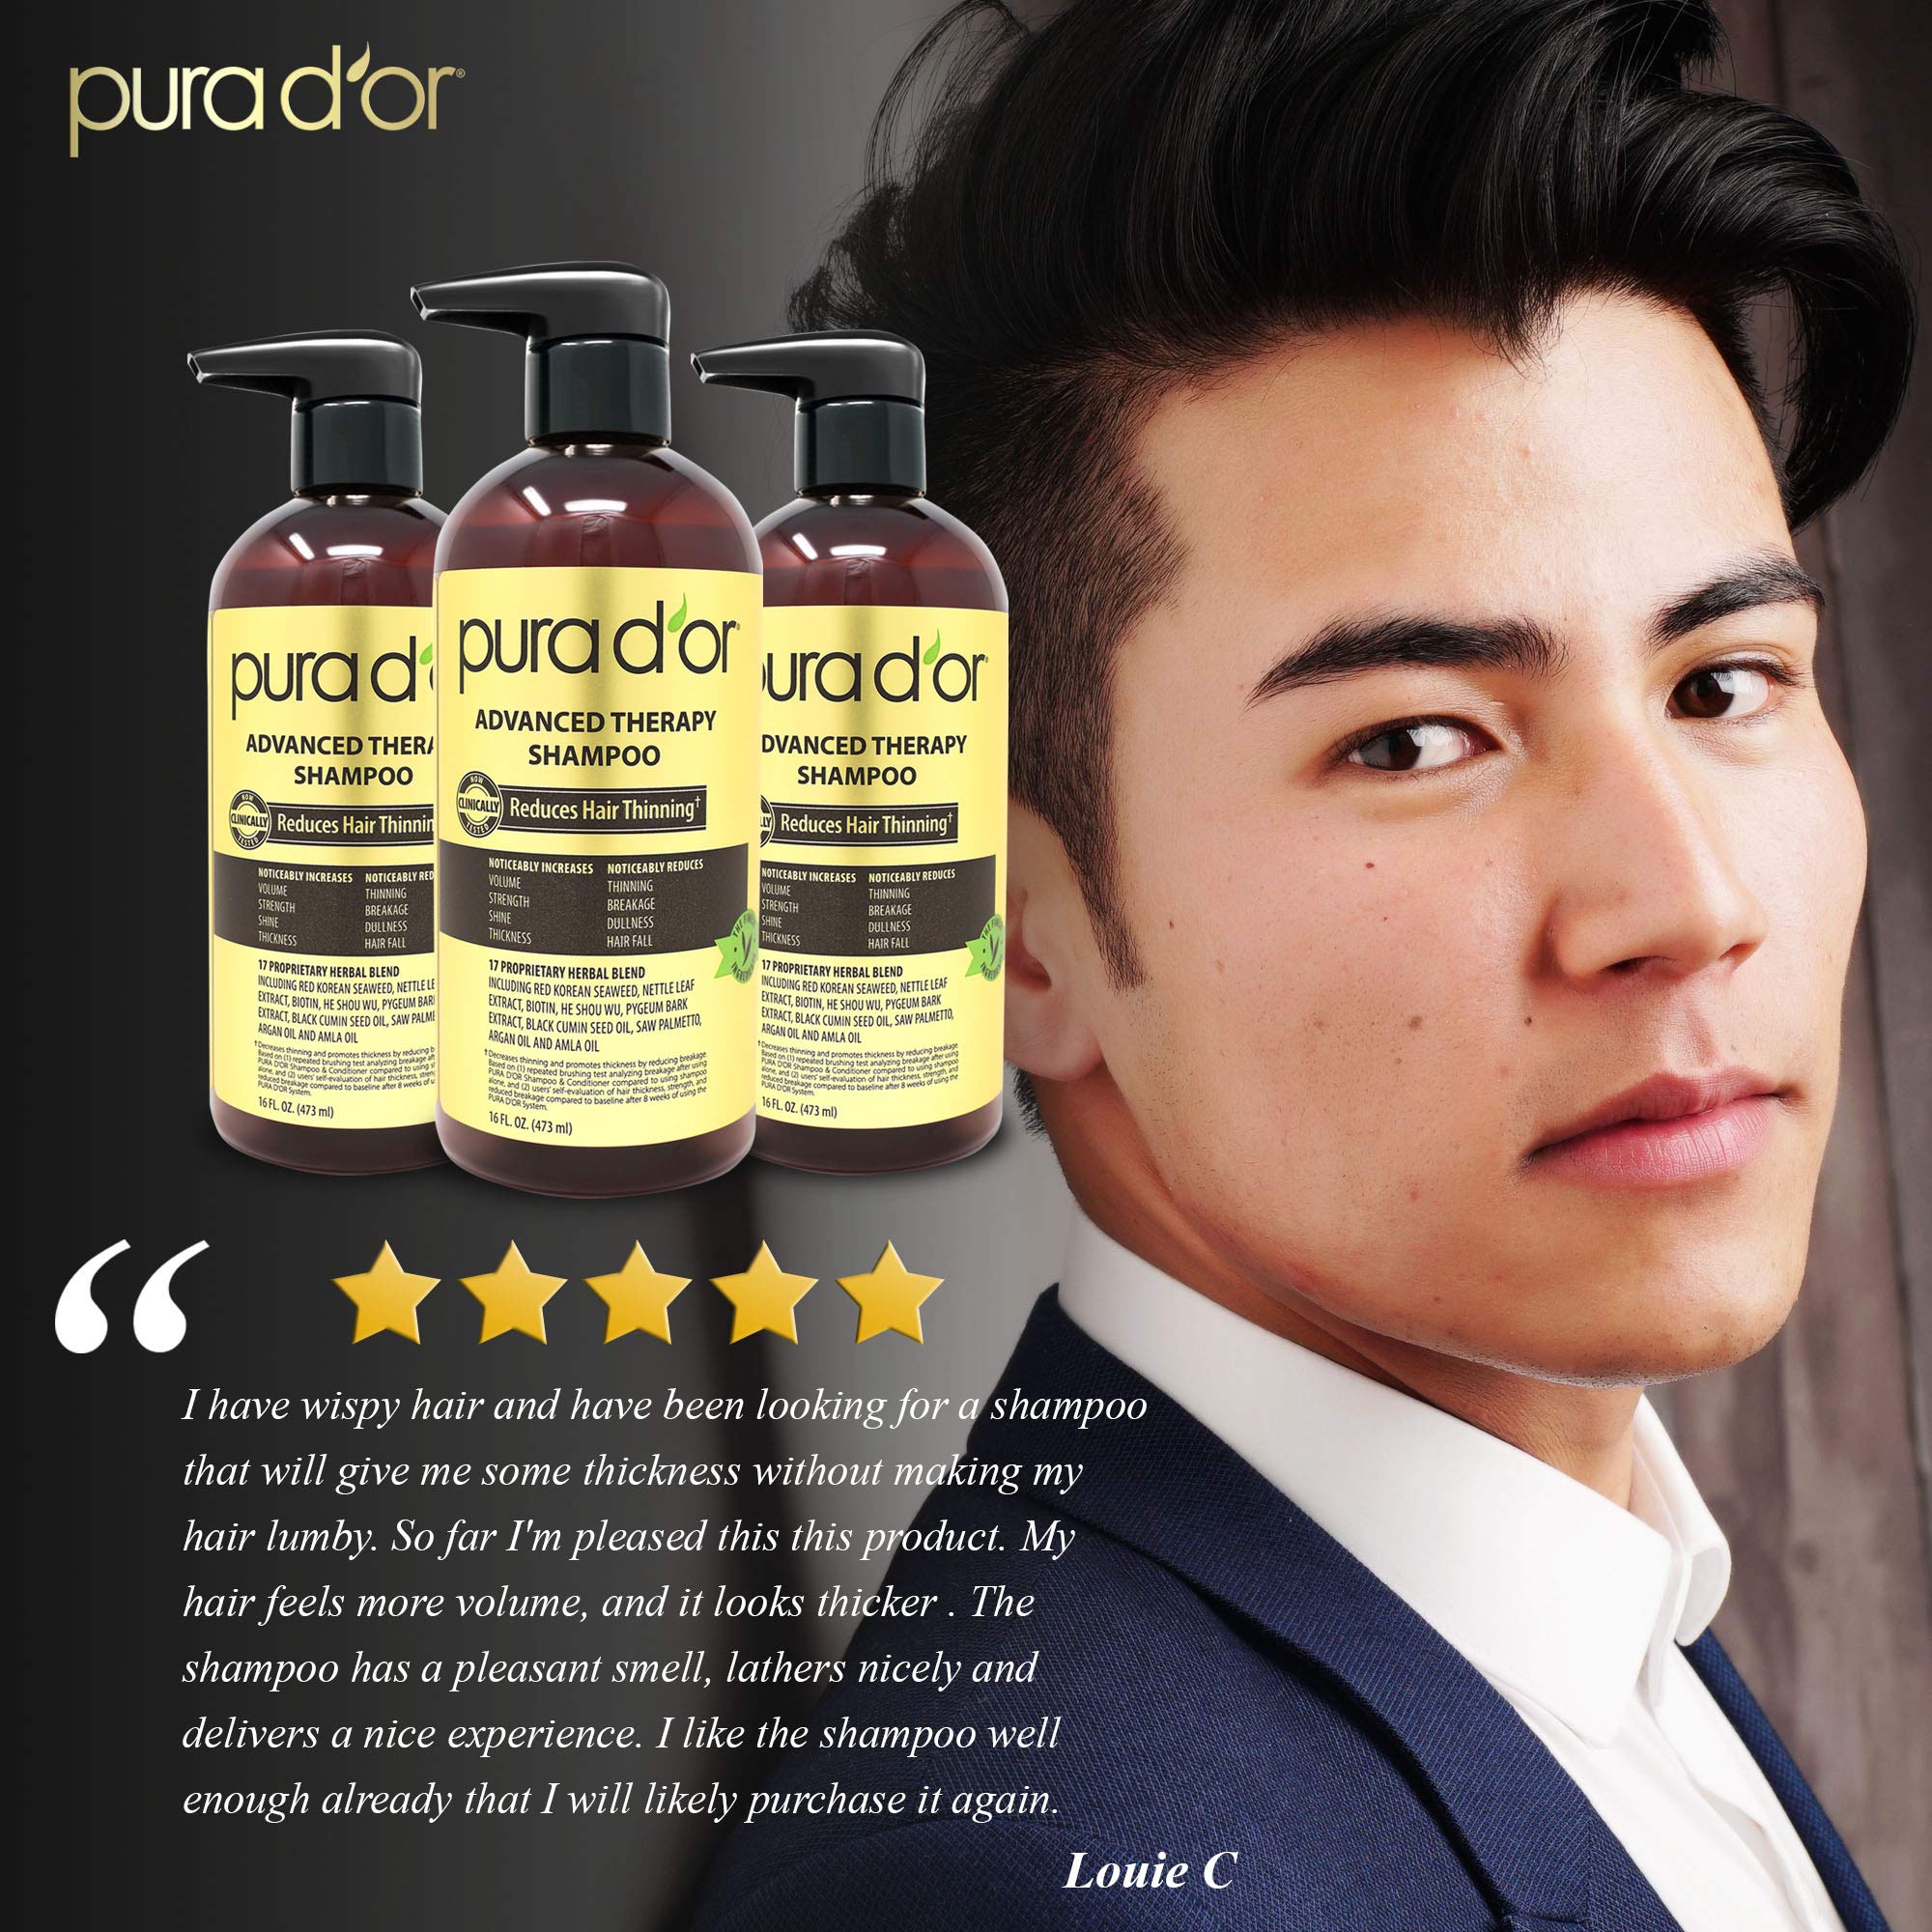 PURA D'OR Advanced Therapy Shampoo (16oz) Reduces Hair Thinning & Increases Volume, No Sulfate, Biotin Shampoo Infused with Argan Oil, Aloe Vera for All Hair Types, Men & Women (Packaging May Vary)